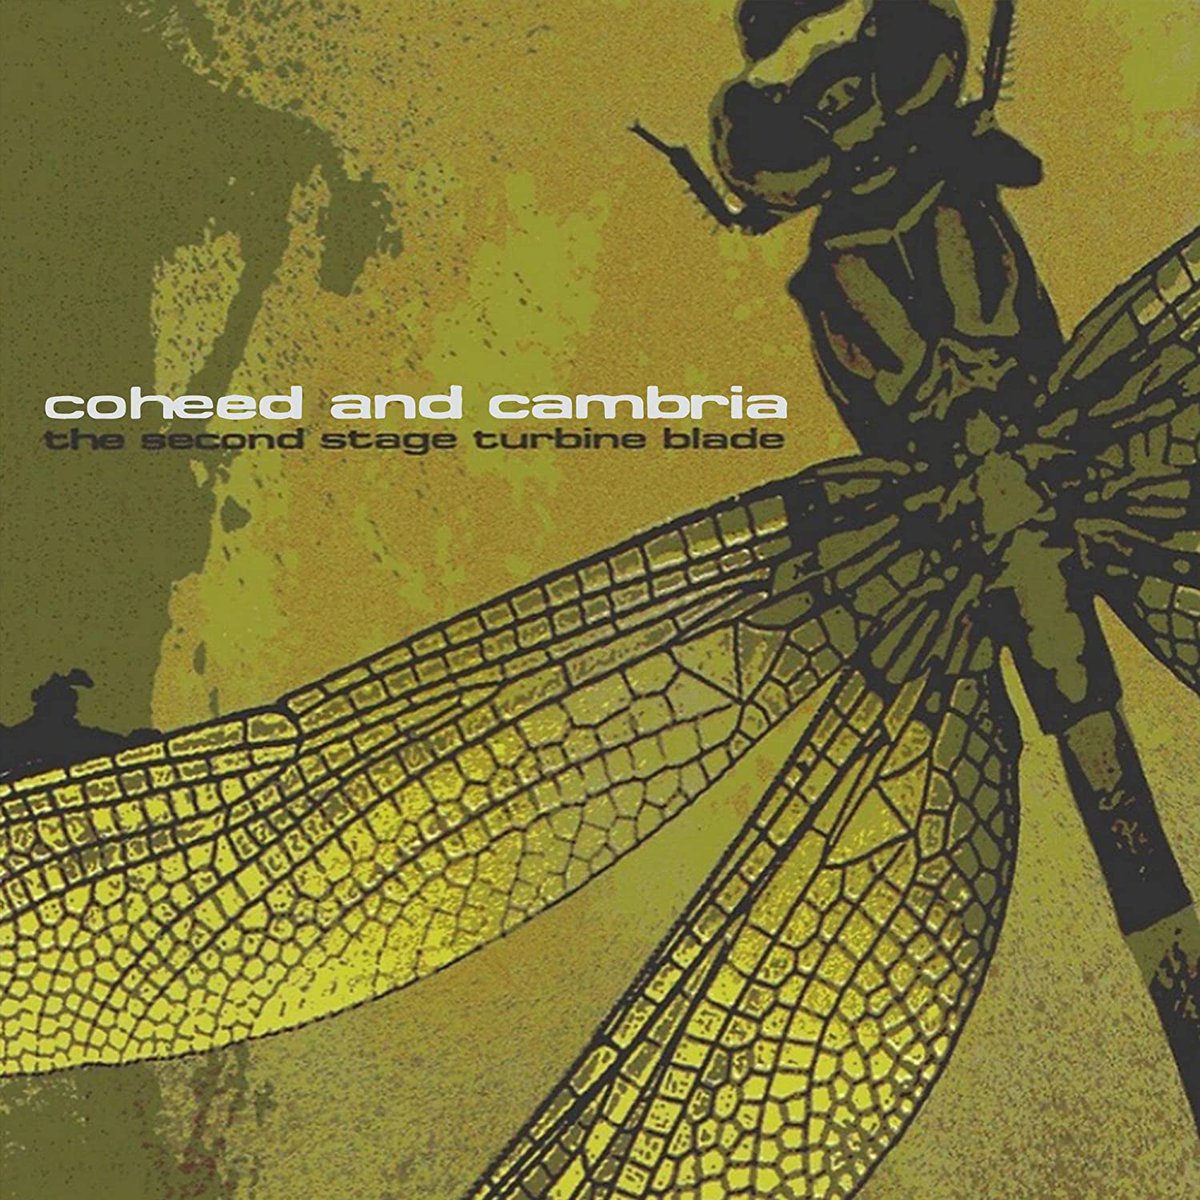 #NowPlaying The Second Stage Turbine Blade
 by Coheed and Cambria #RecordOfTheDay #ROTD #AlbumOfTheDay #AOTD #1265 #CoheedAndCambria #PostHardcore #ProgressiveRock #USA 🇺🇸 #WarmUp #Hellfest #Hellfest2023